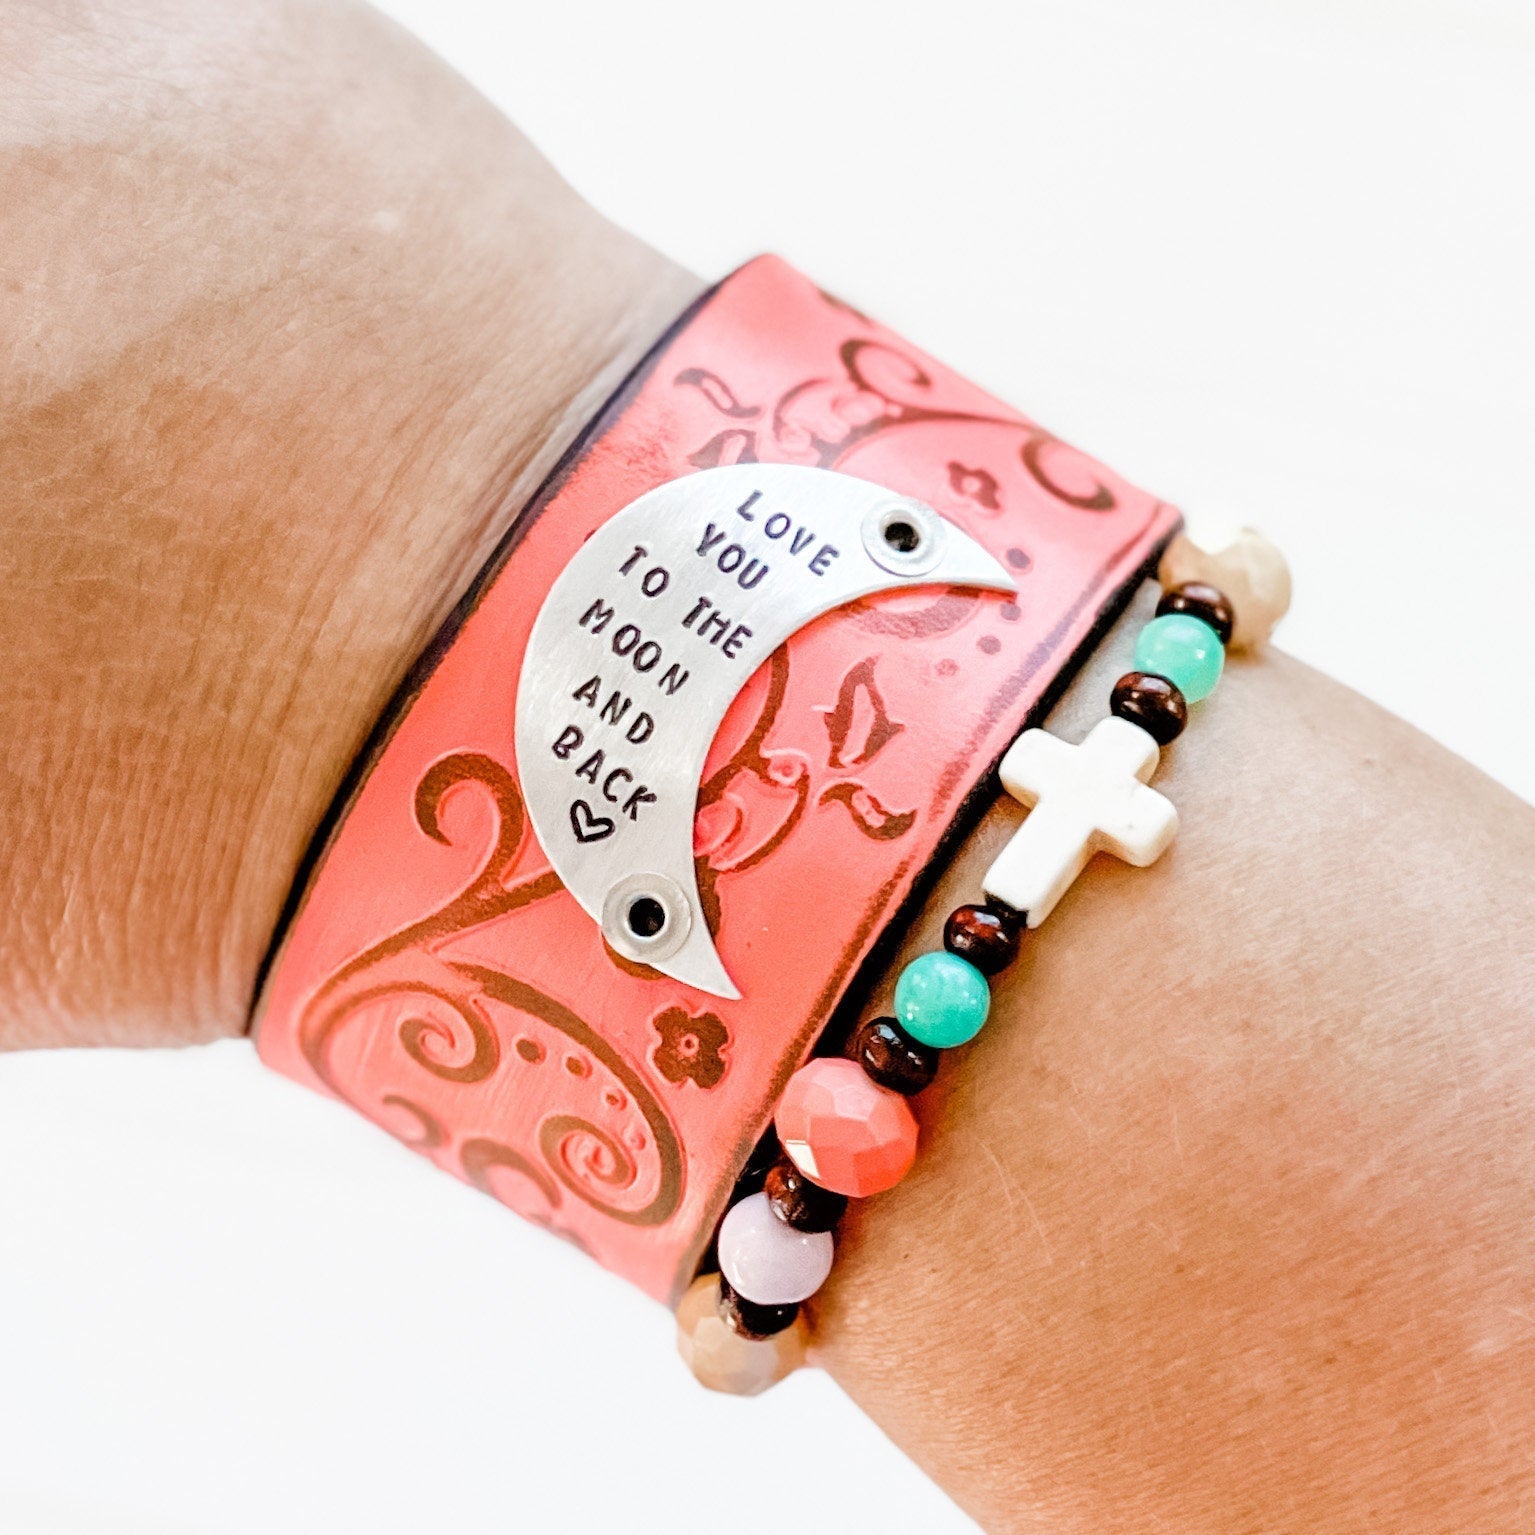 Personalised Stamped Leather Bracelet By Sally Clay | notonthehighstreet.com